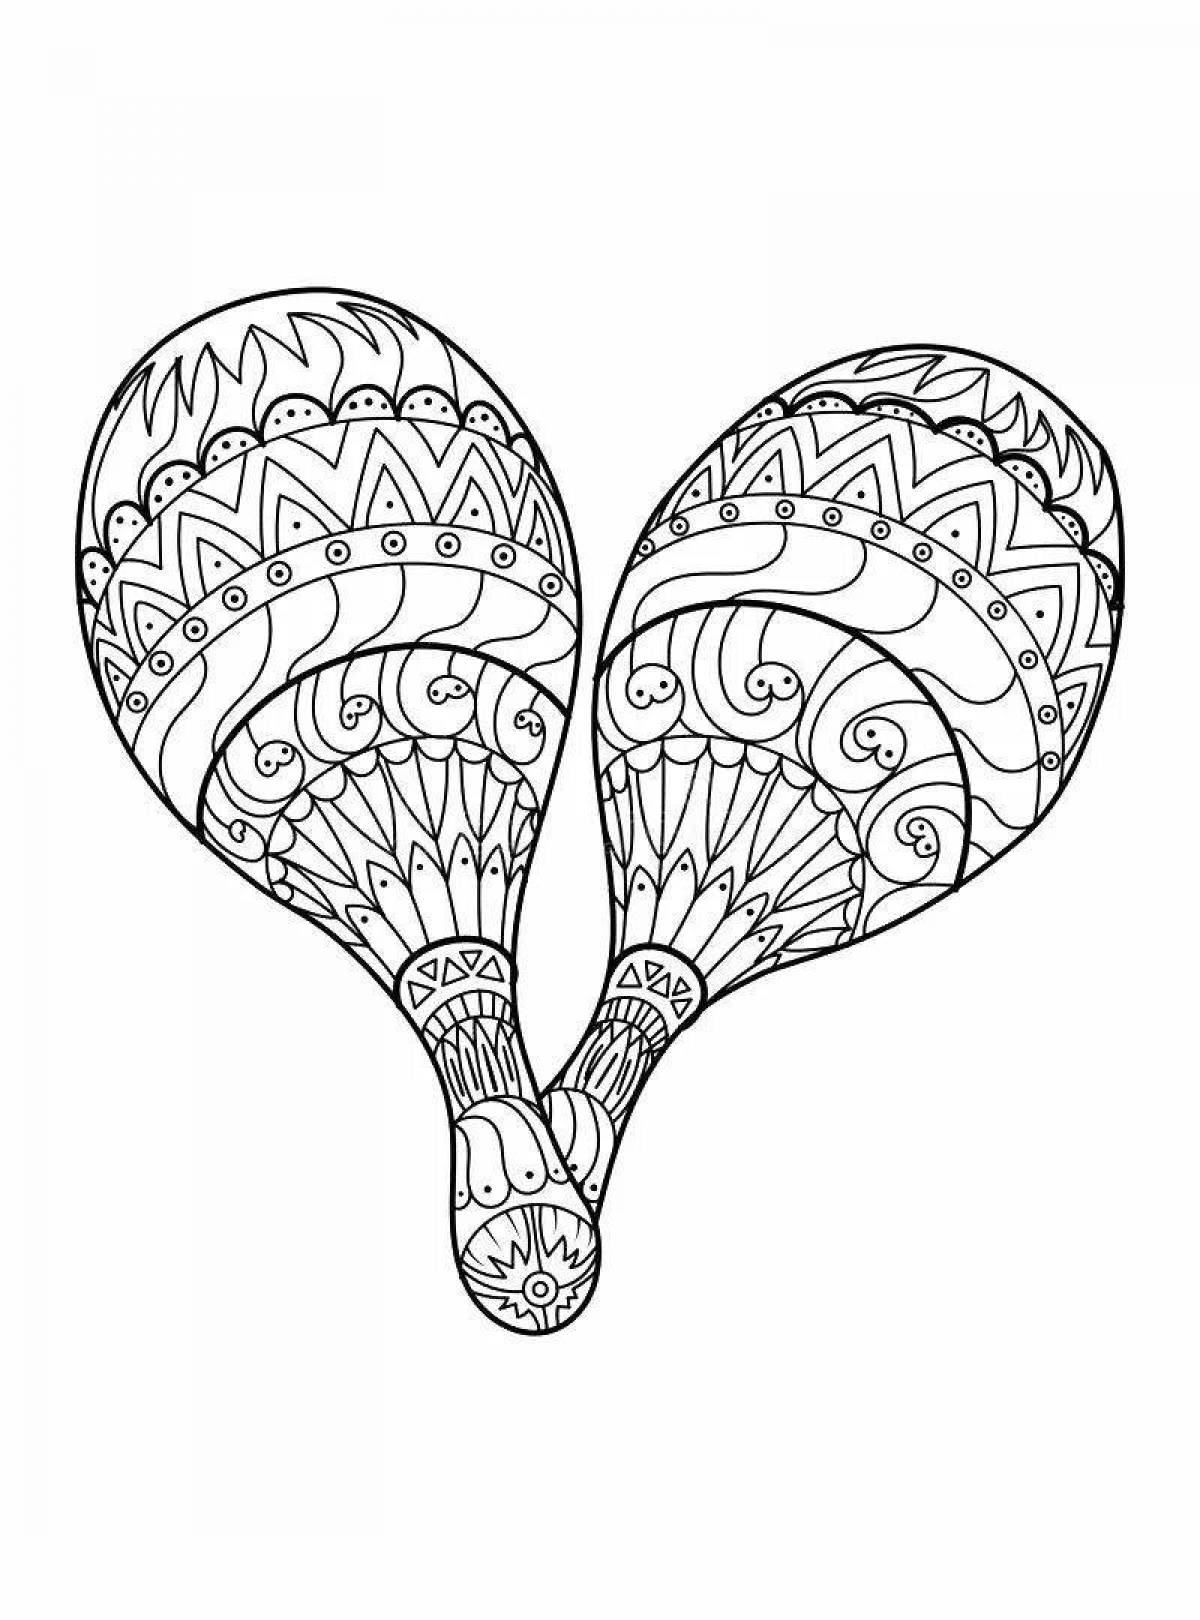 Funny painted spoon coloring book